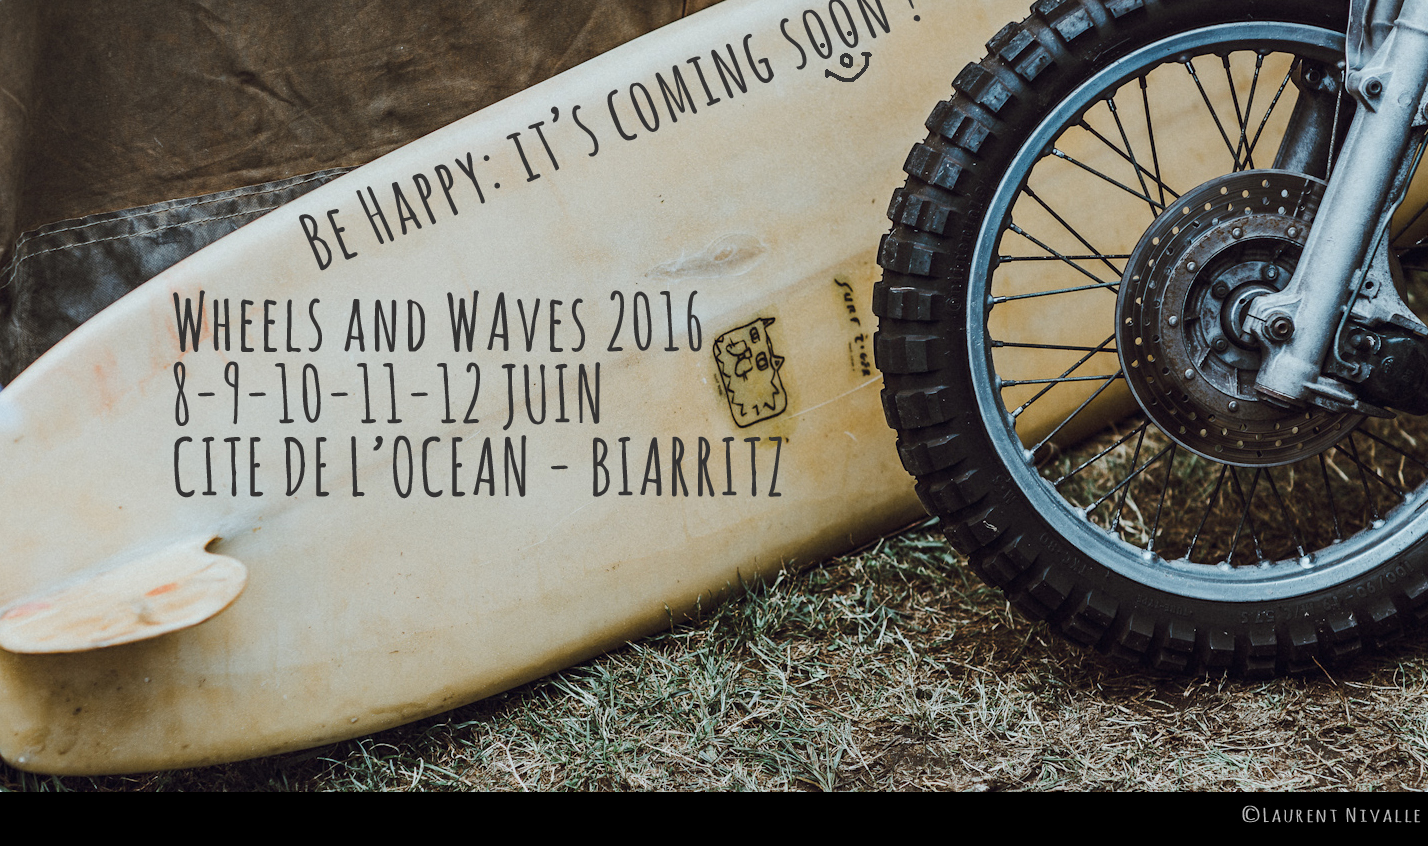 LAURENT_NIVALLE_WHEELS_AND_WAVES_2015